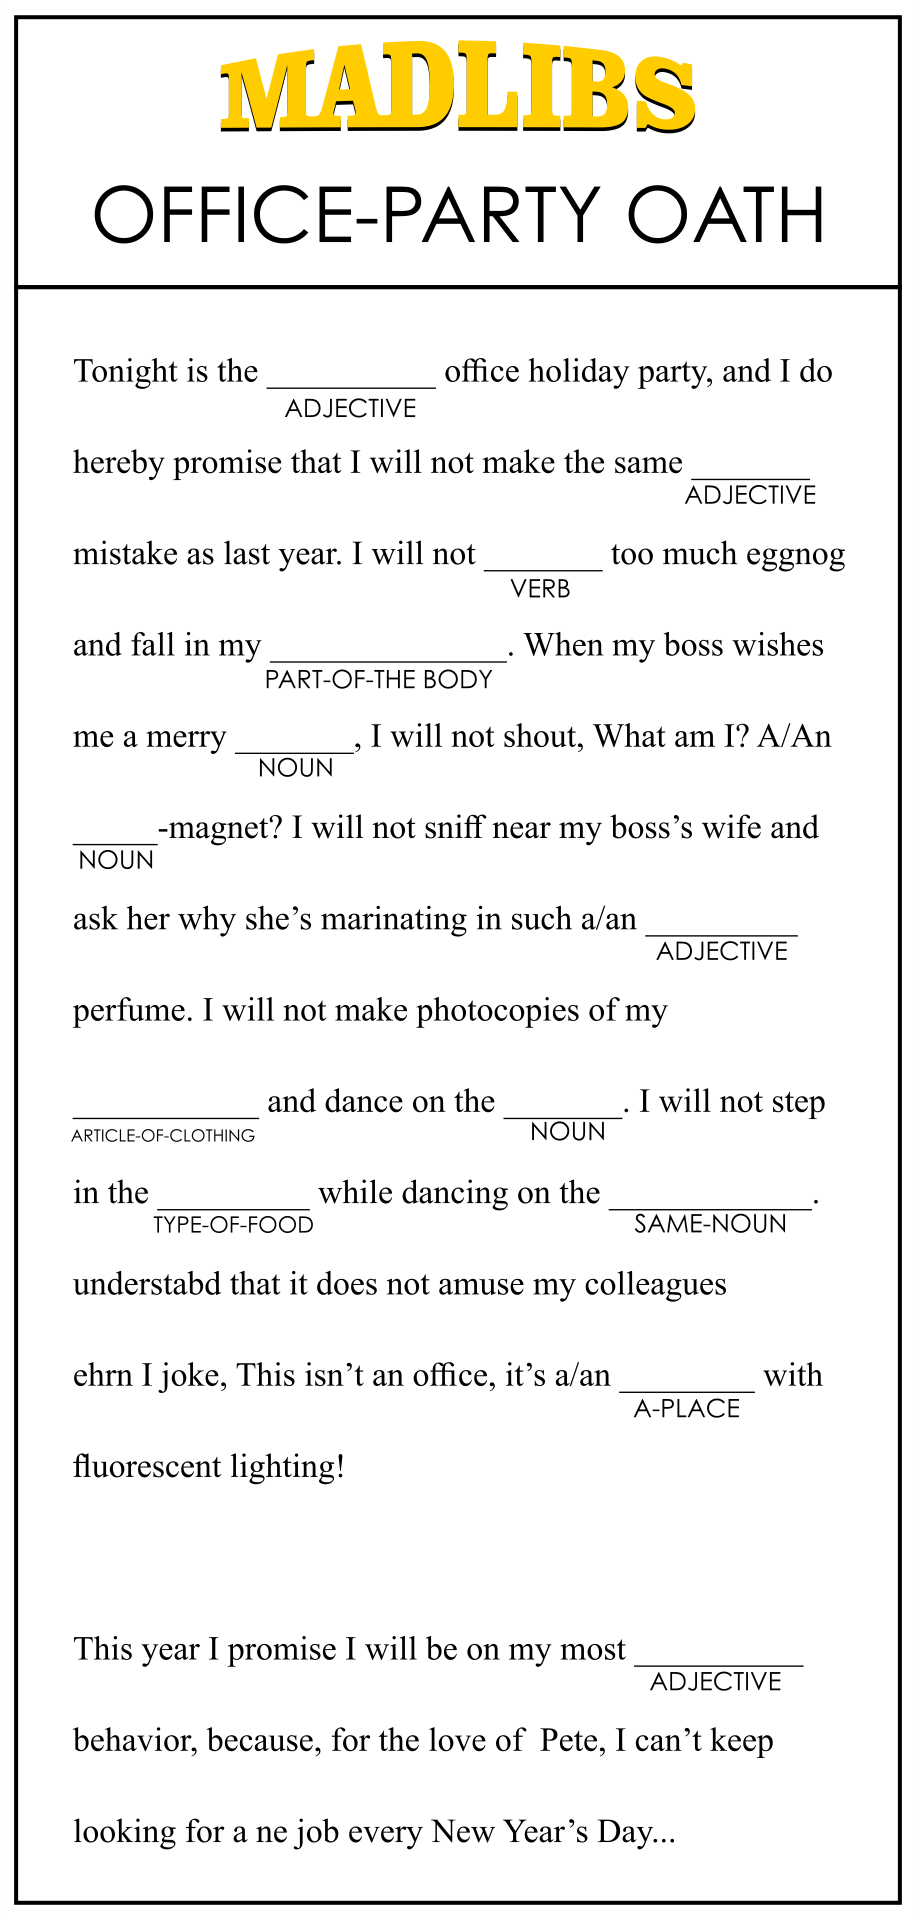 Free Printable Mad Libs For Work